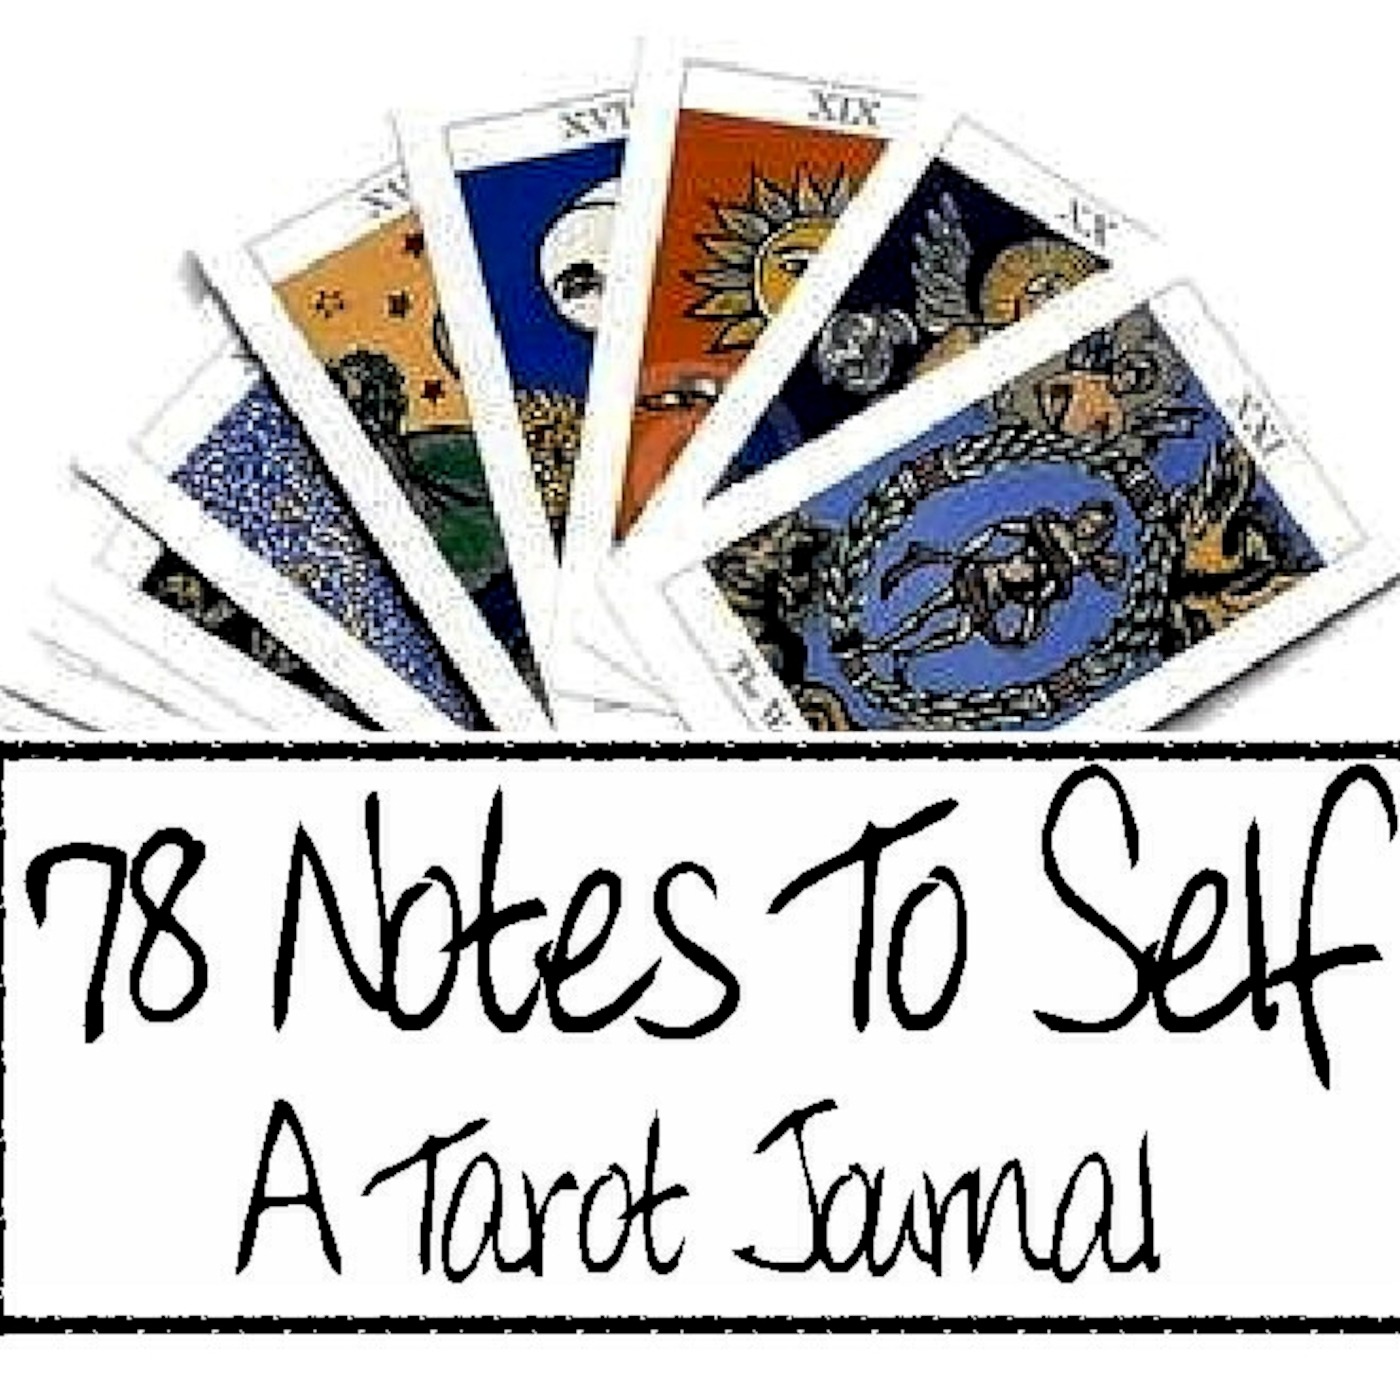 78 Notes To Self Podcast